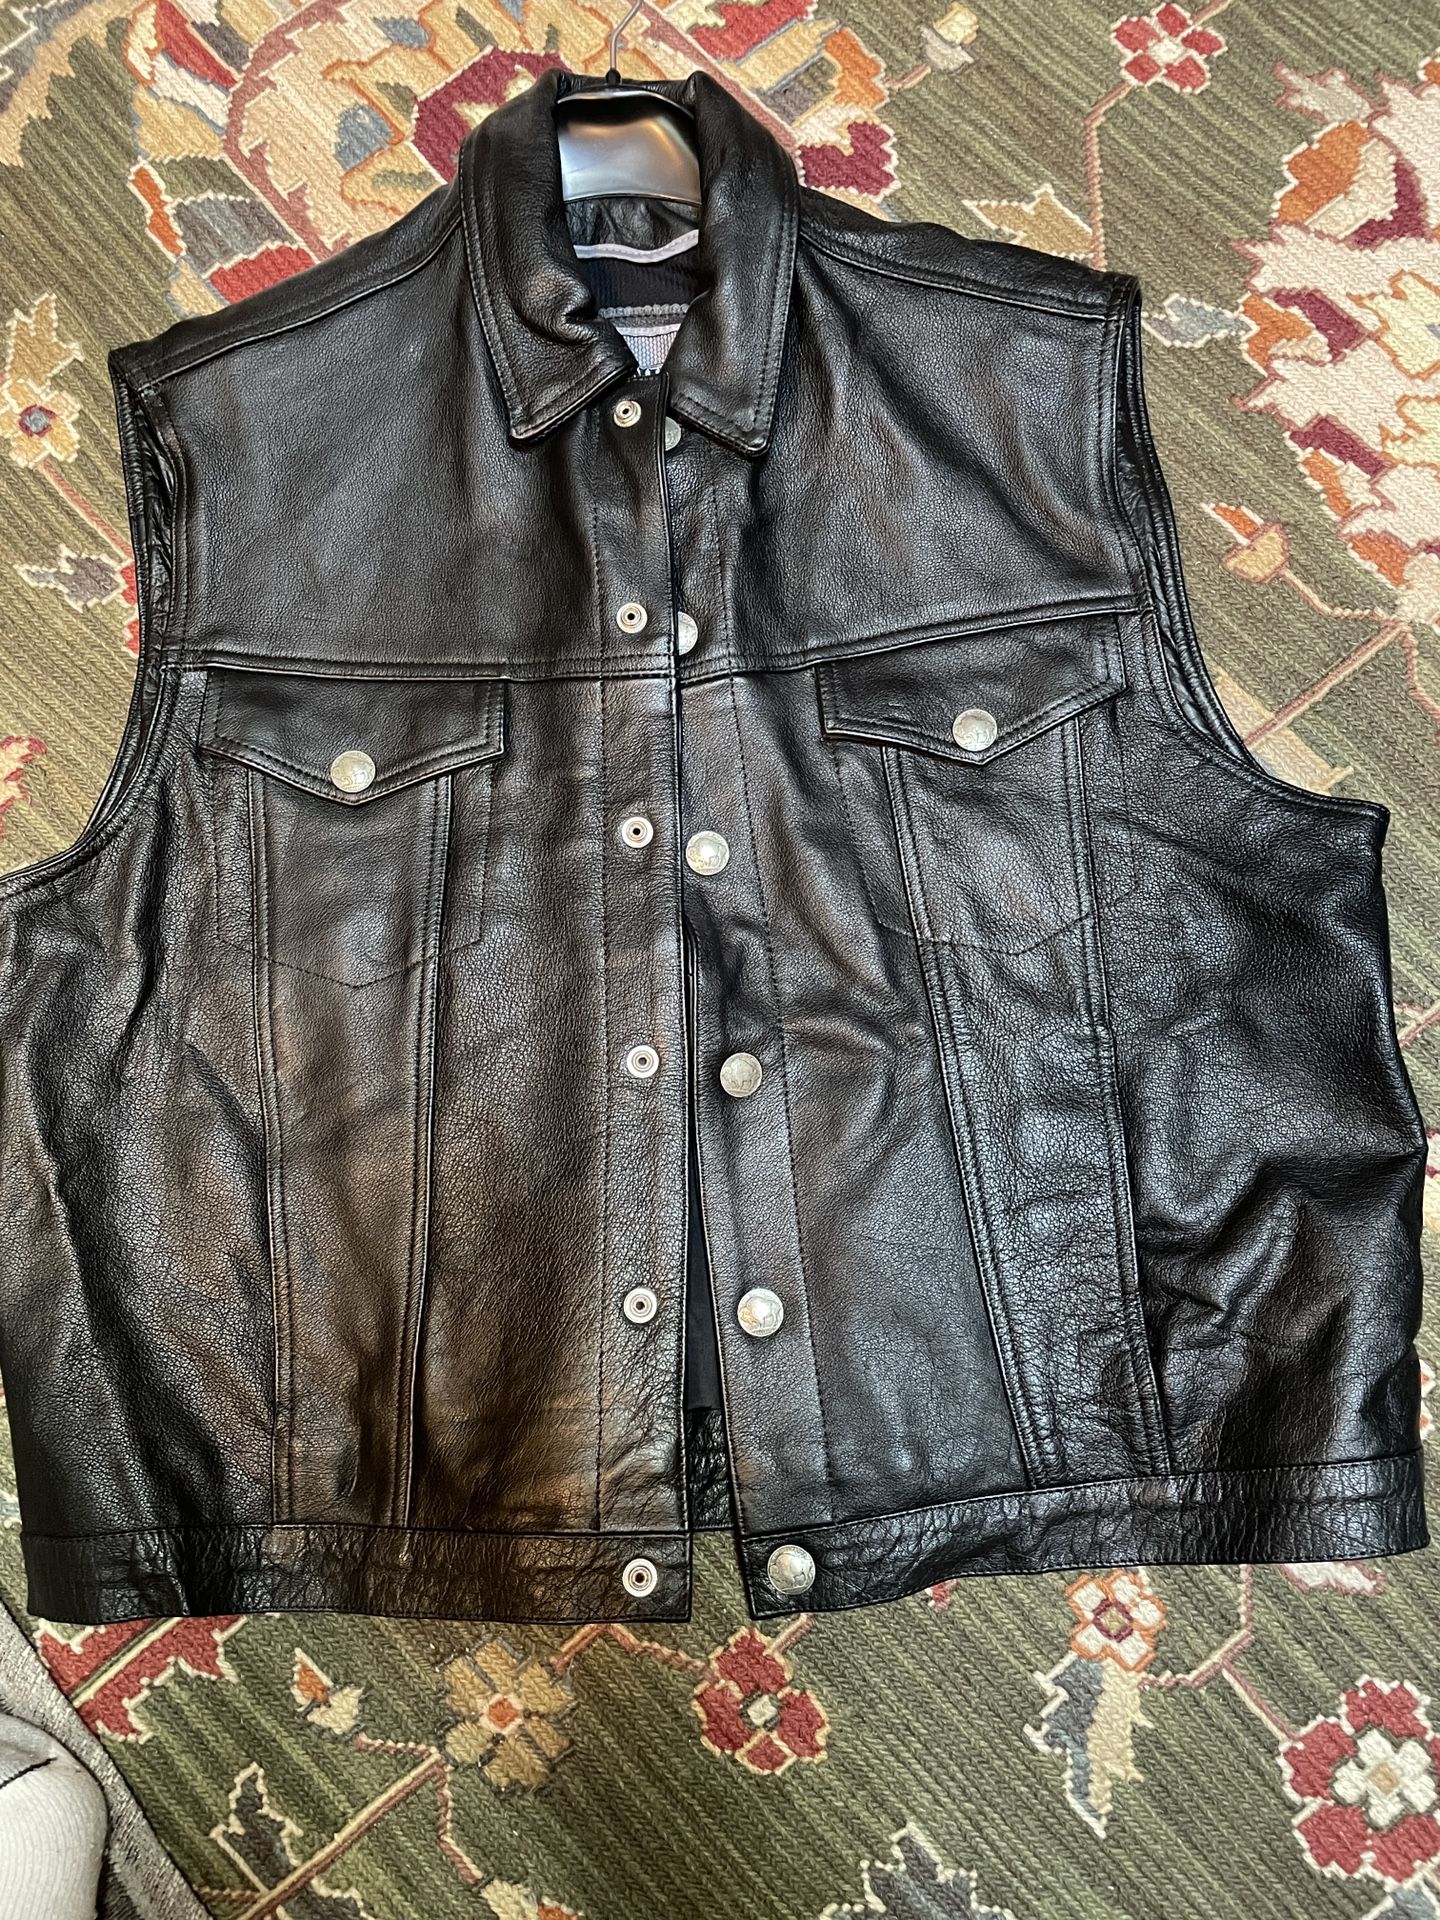 Leather Shirt And Vest 